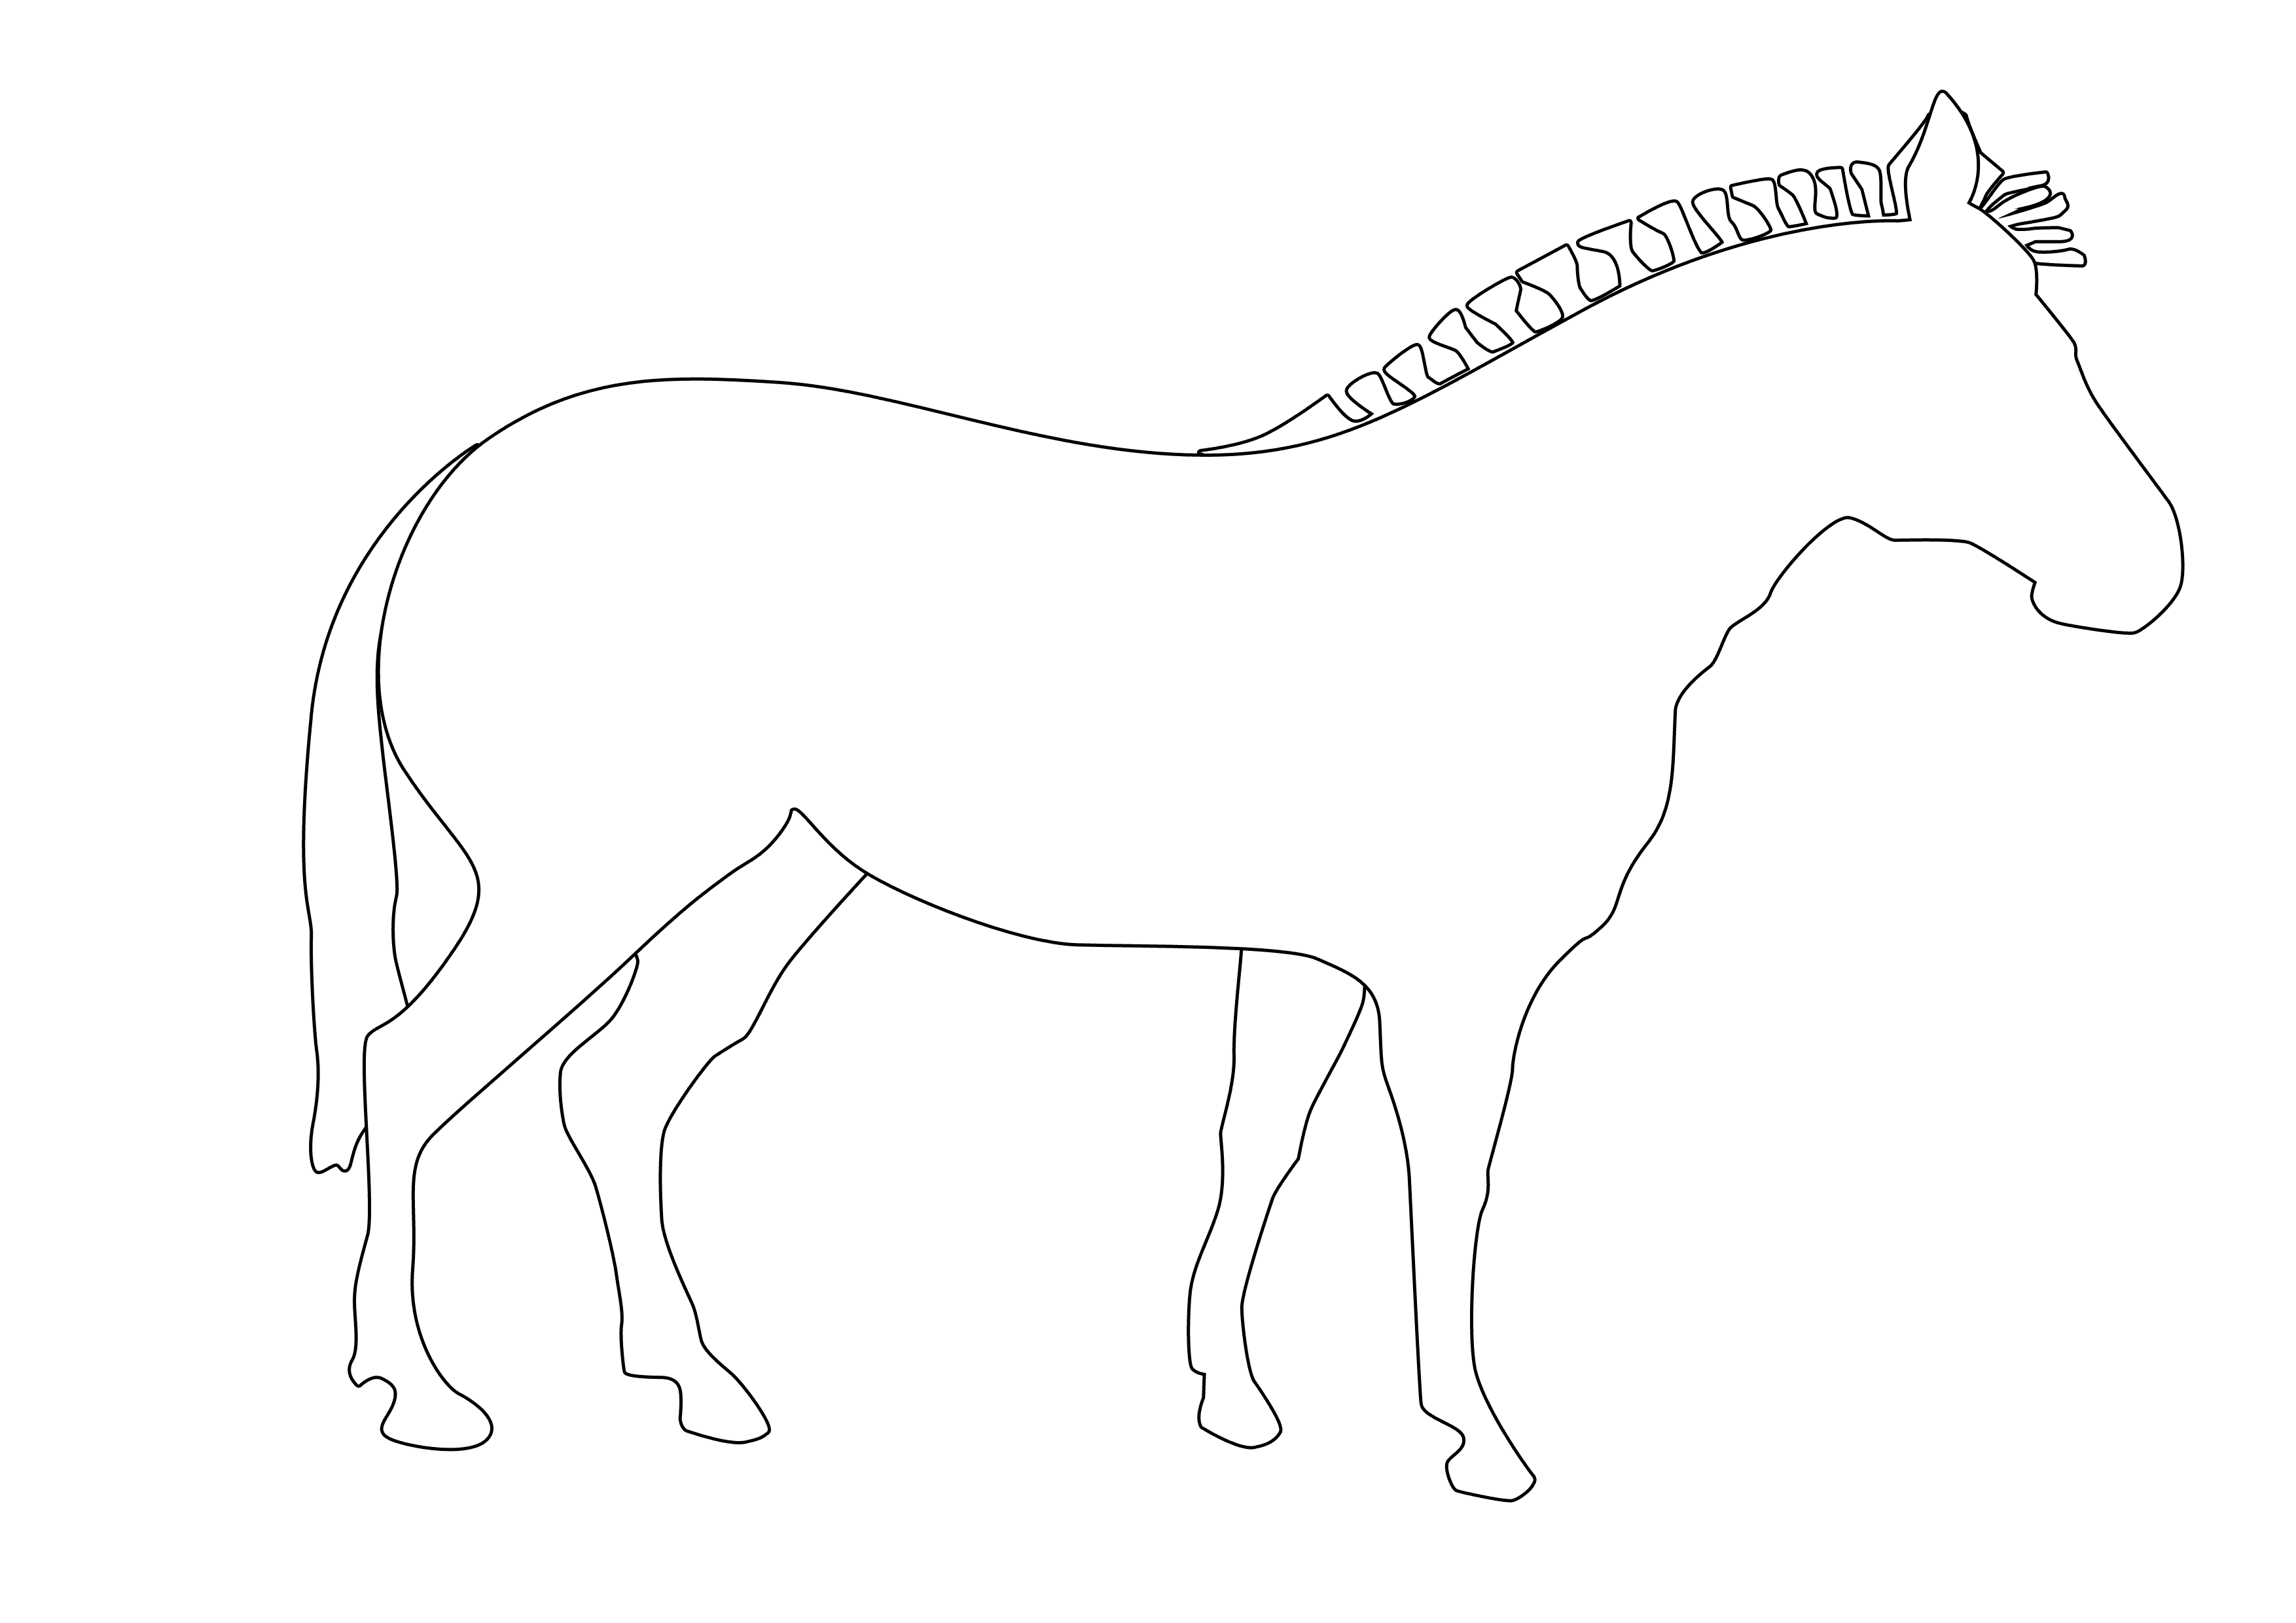 Zebra Outline Drawing | picturespider.com